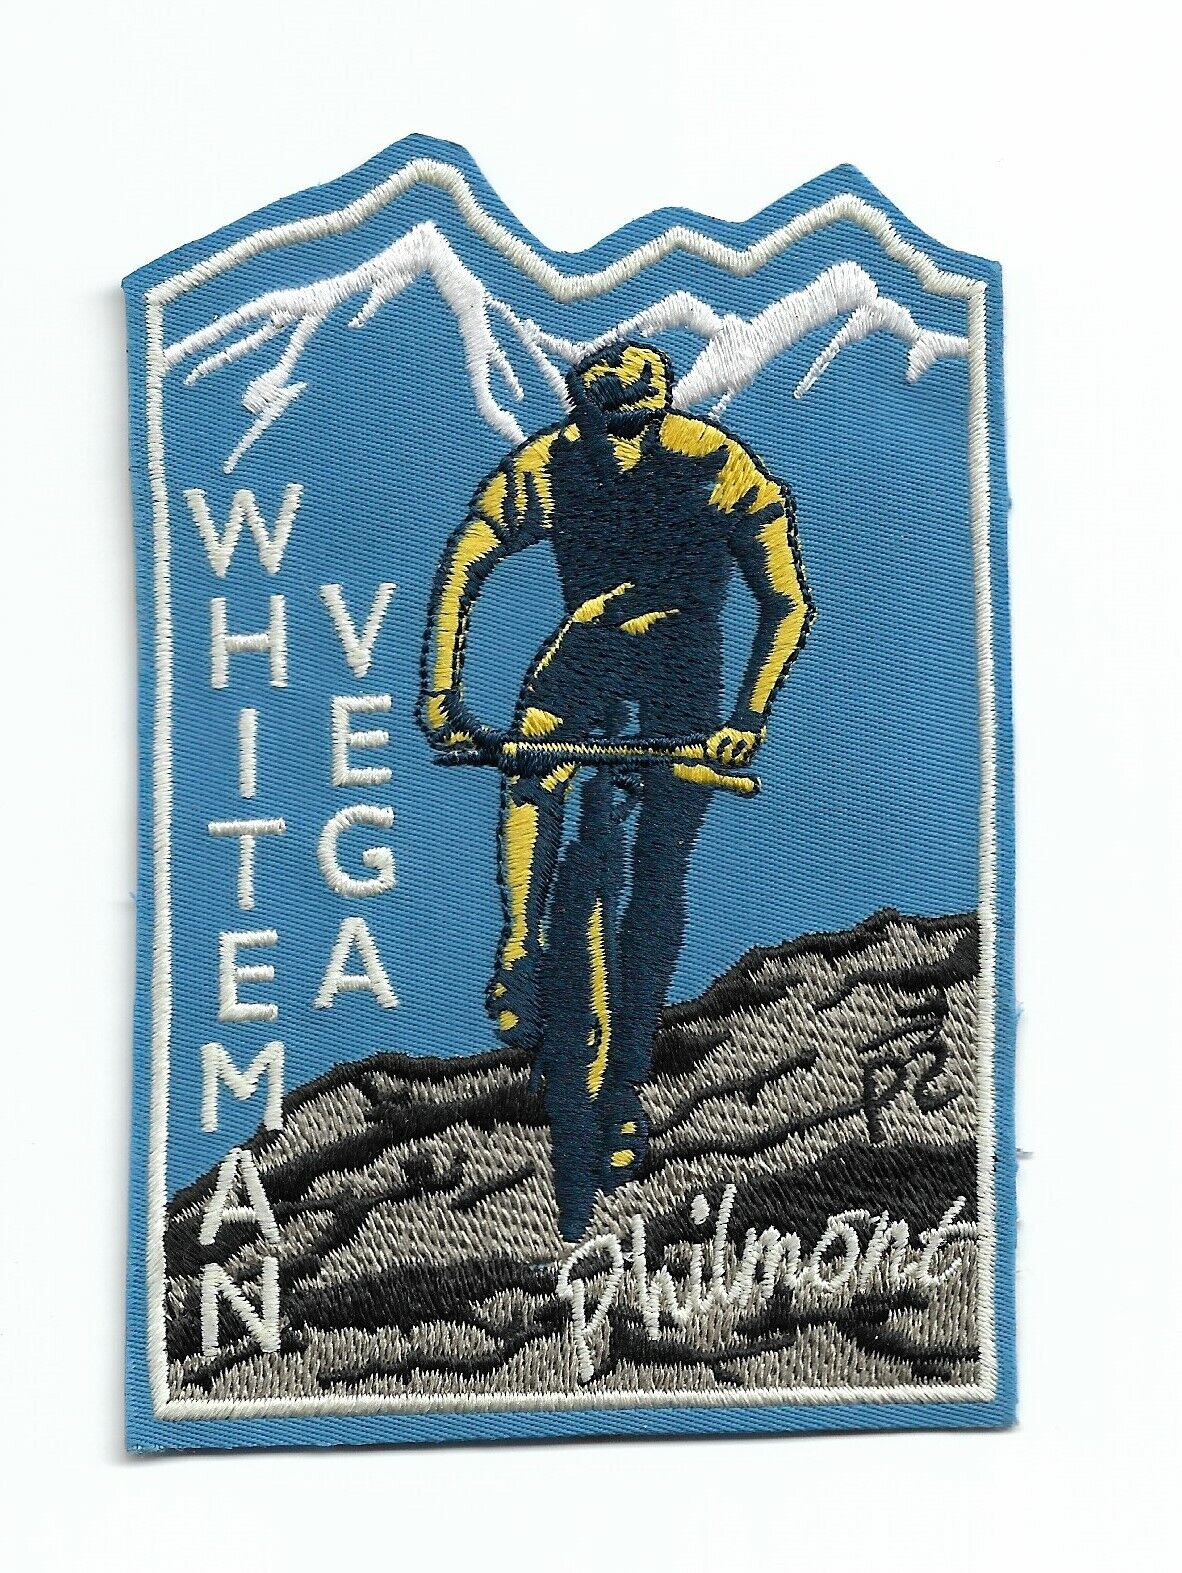 PHILMONT SCOUT RANCH * WHITEMAN VEGA CAMP PATCH # 1 * 3 INCH BY 4 1/4 INCH 